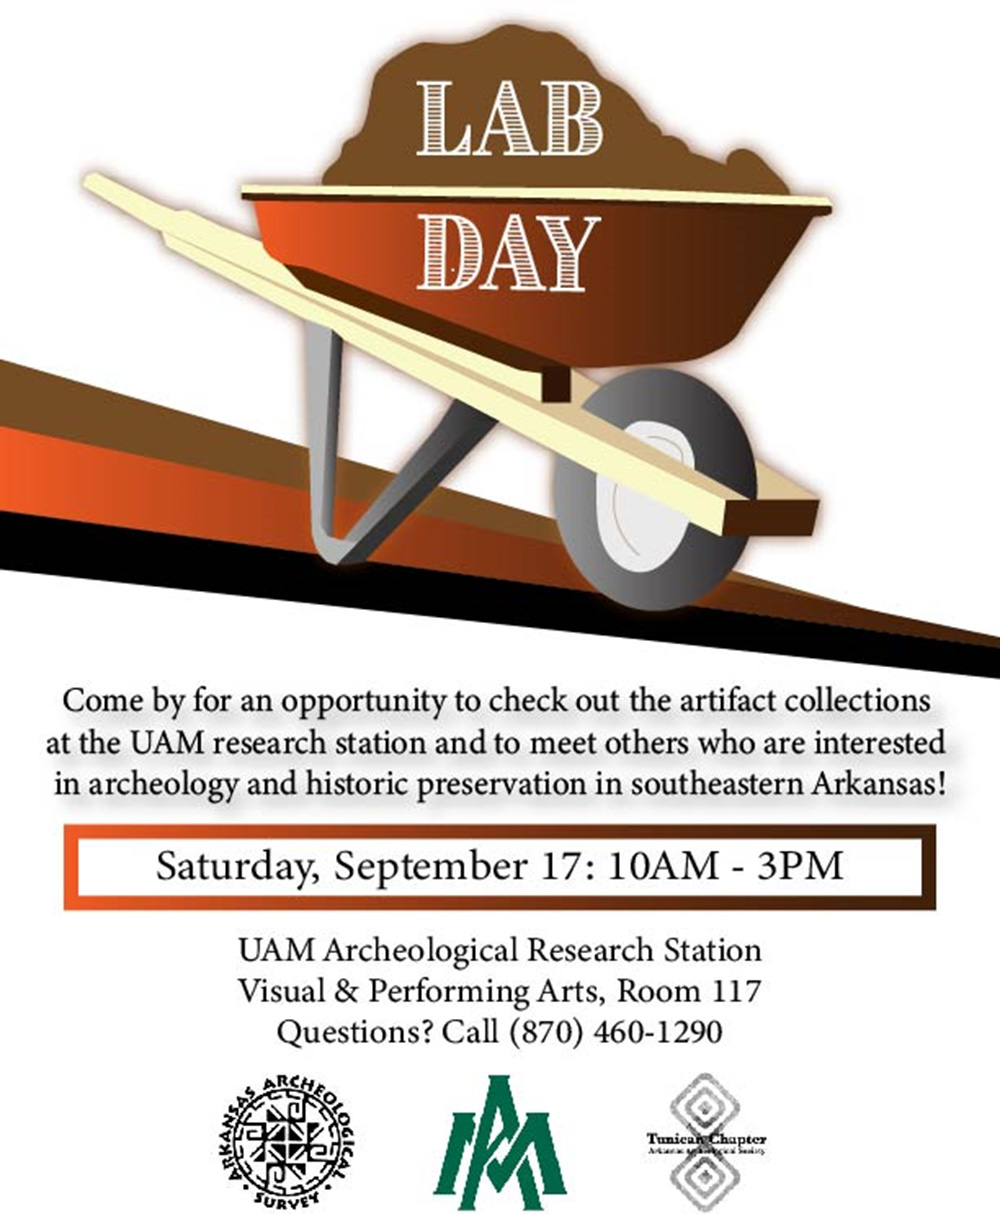 UAM Archaeological Research Station hosting lab day September 17